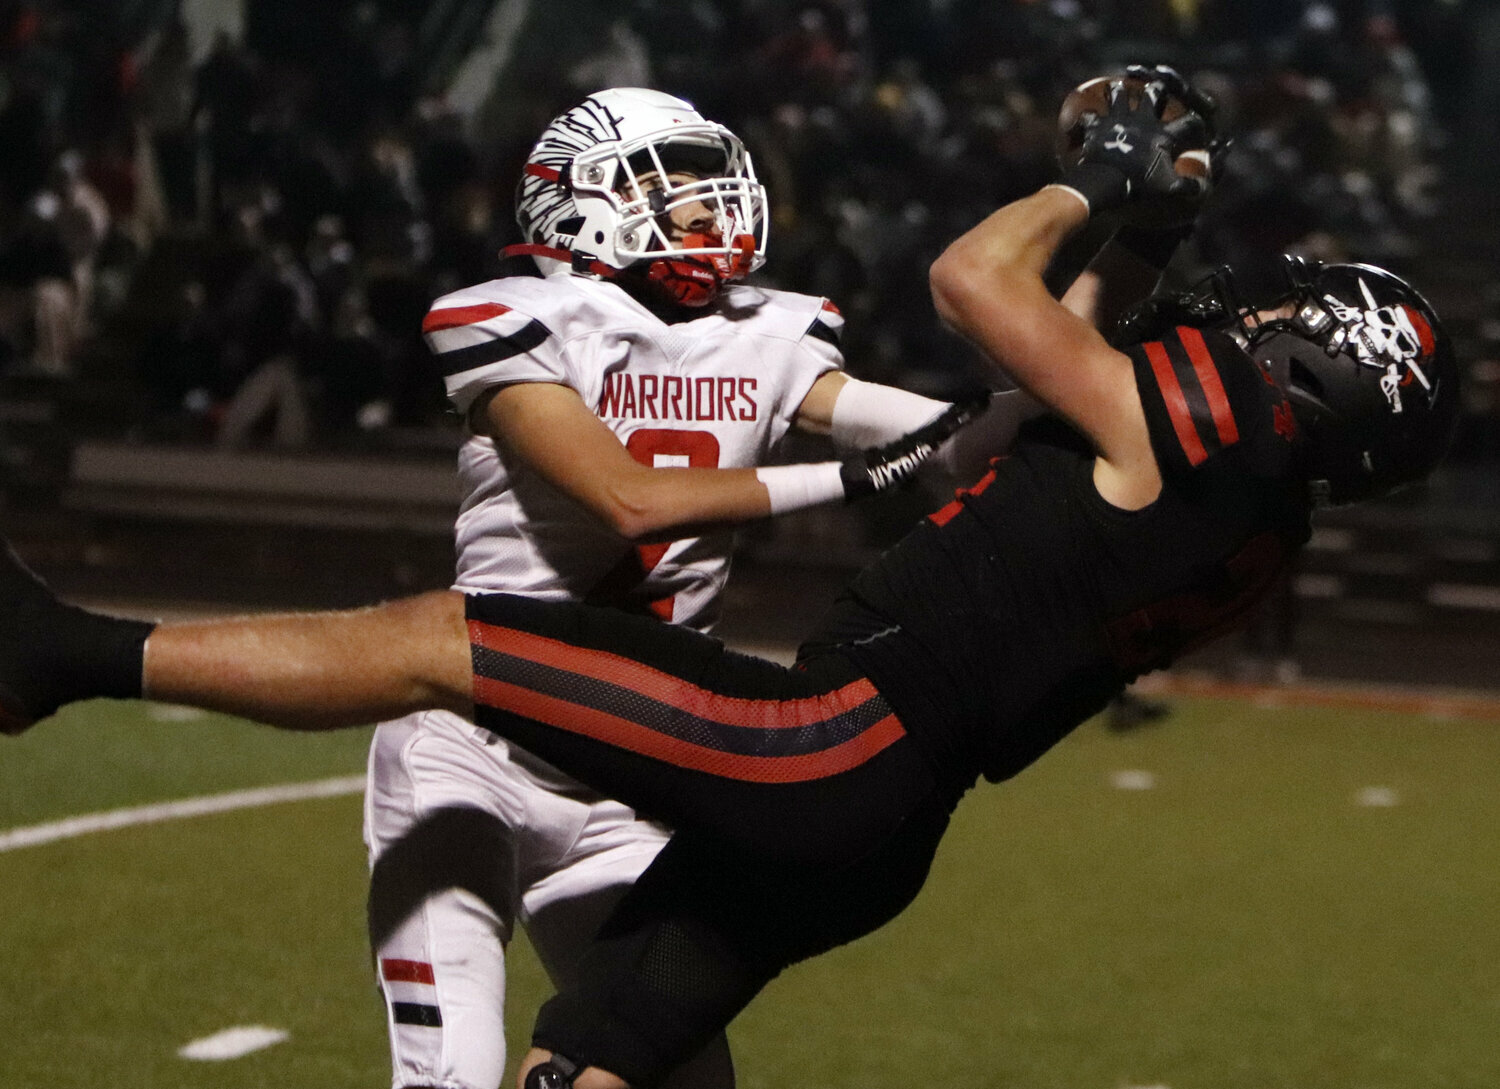 Warrenton's Brandon Johnson attempts to knock the ball loose while covering a Hannibal receiver during the Class 4, District 4 championship game.